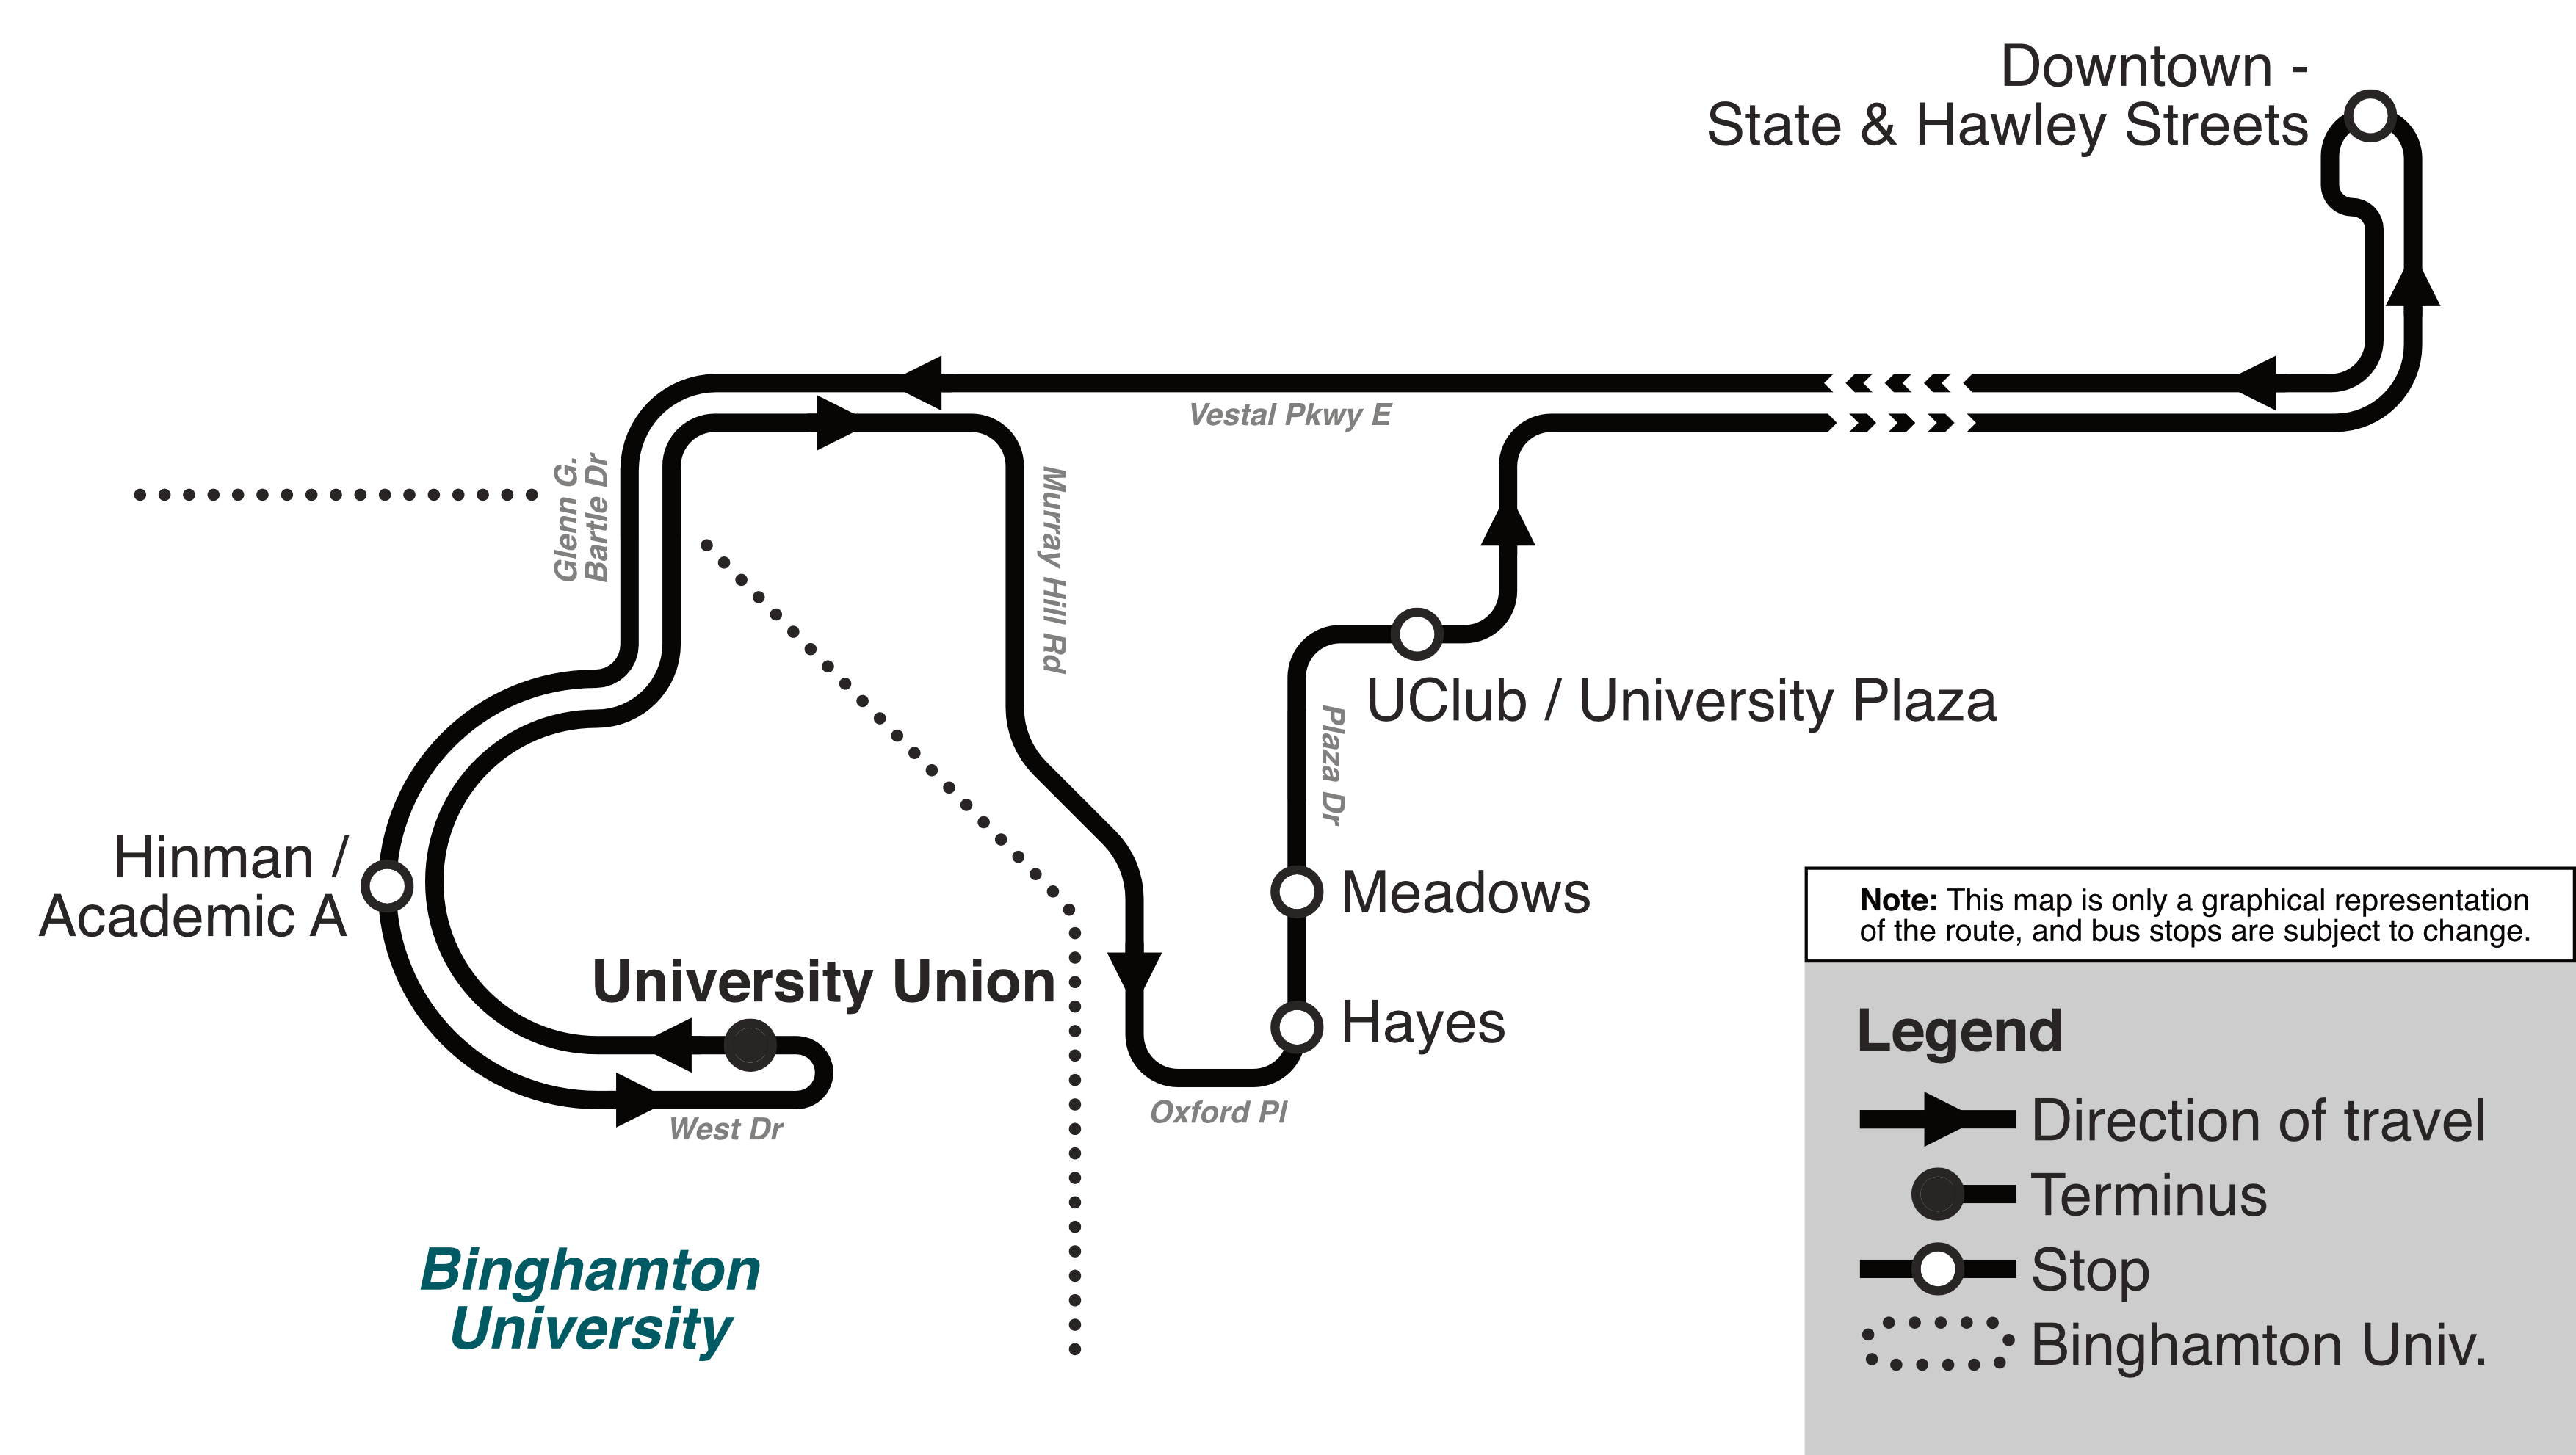 Downtown Express Route Map